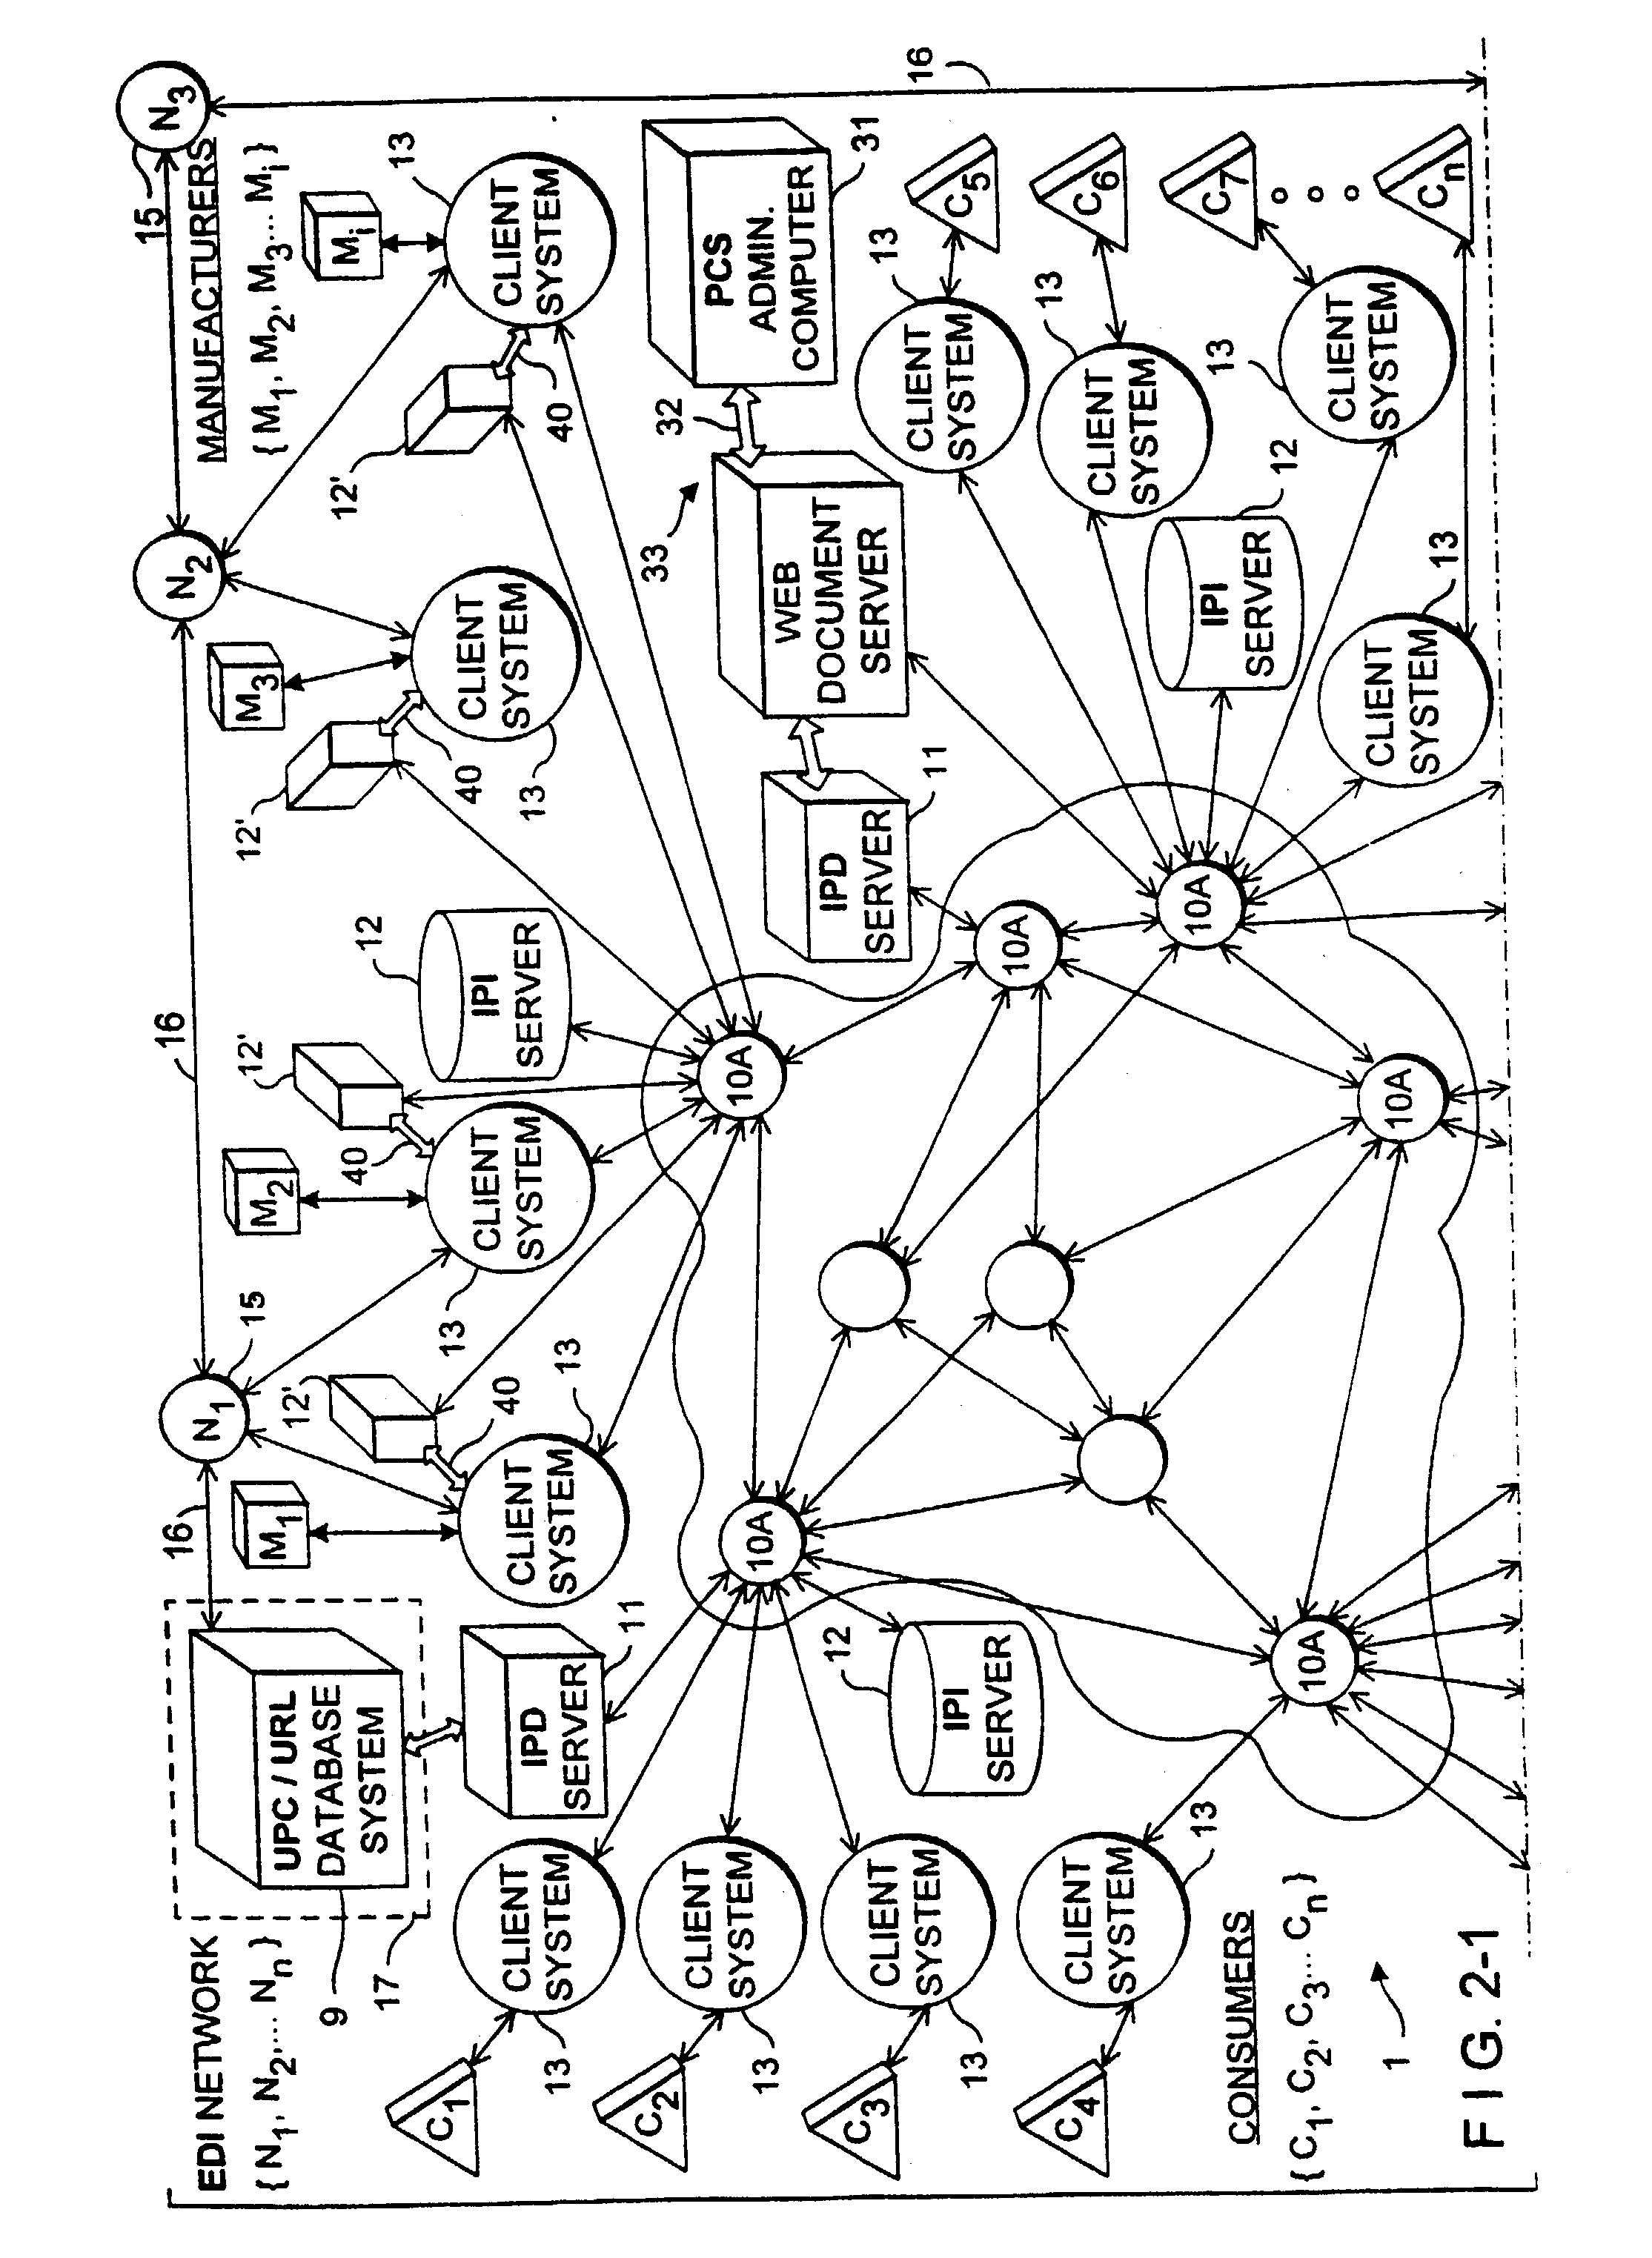 System and method for managing and serving consumer product related information over the internet